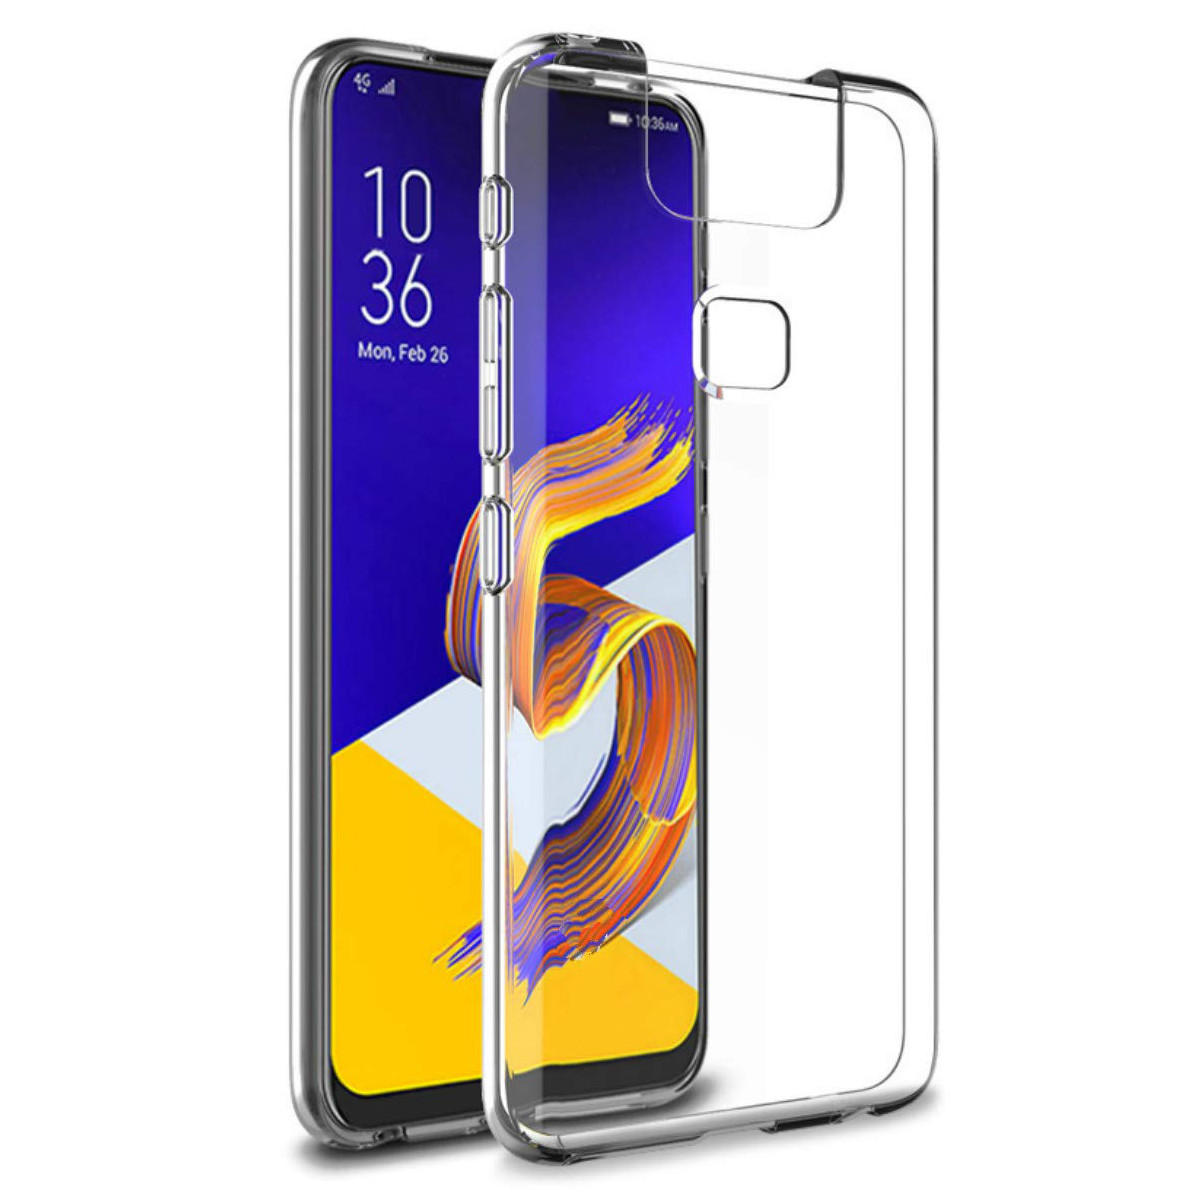 Bakeey Transparent Soft TPU Back Cover Protective Case for Asus Zenfone 6 ZS630KL